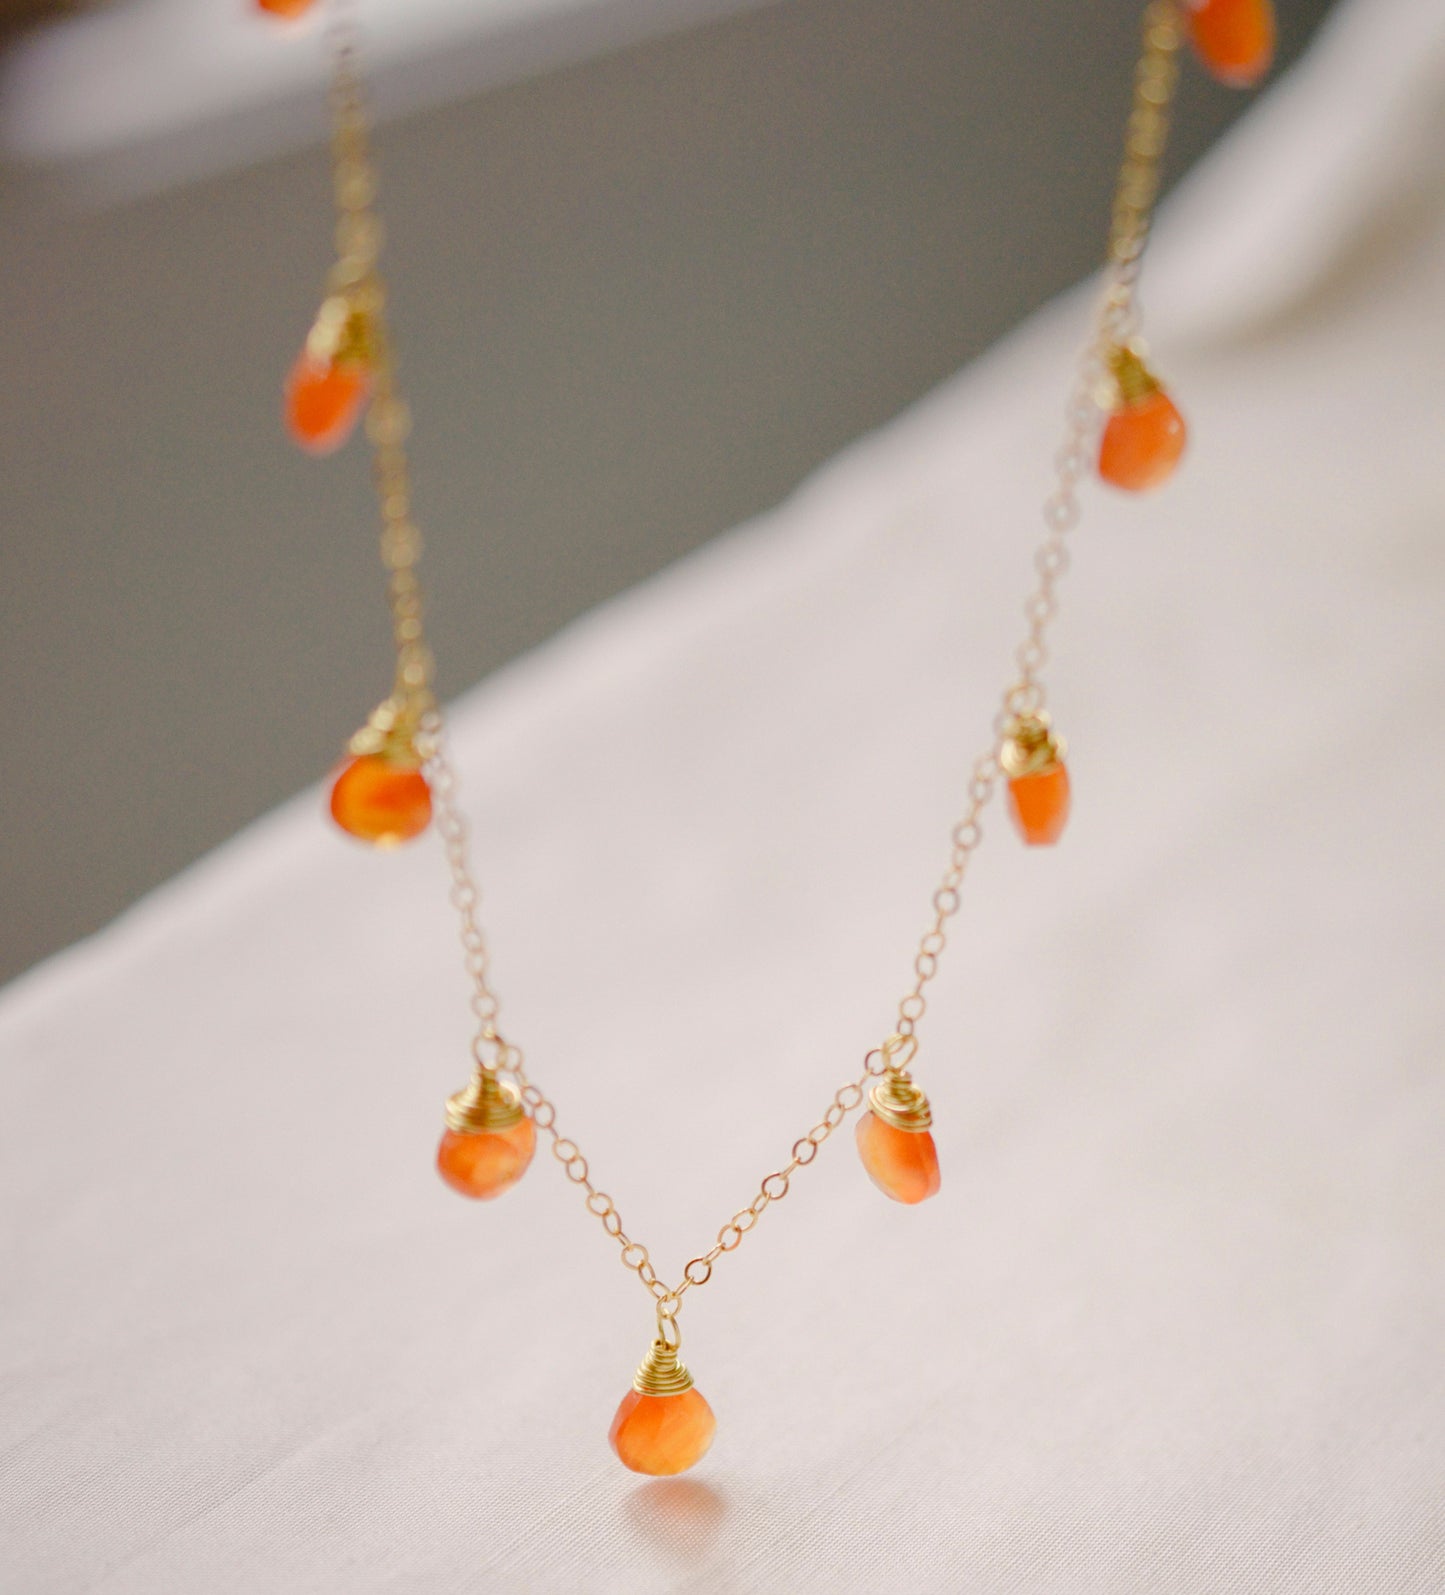 Handmade necklace featuring nine natural Carnelian gemstones set onto a gold filled chain. Sterling Silver is also available. 